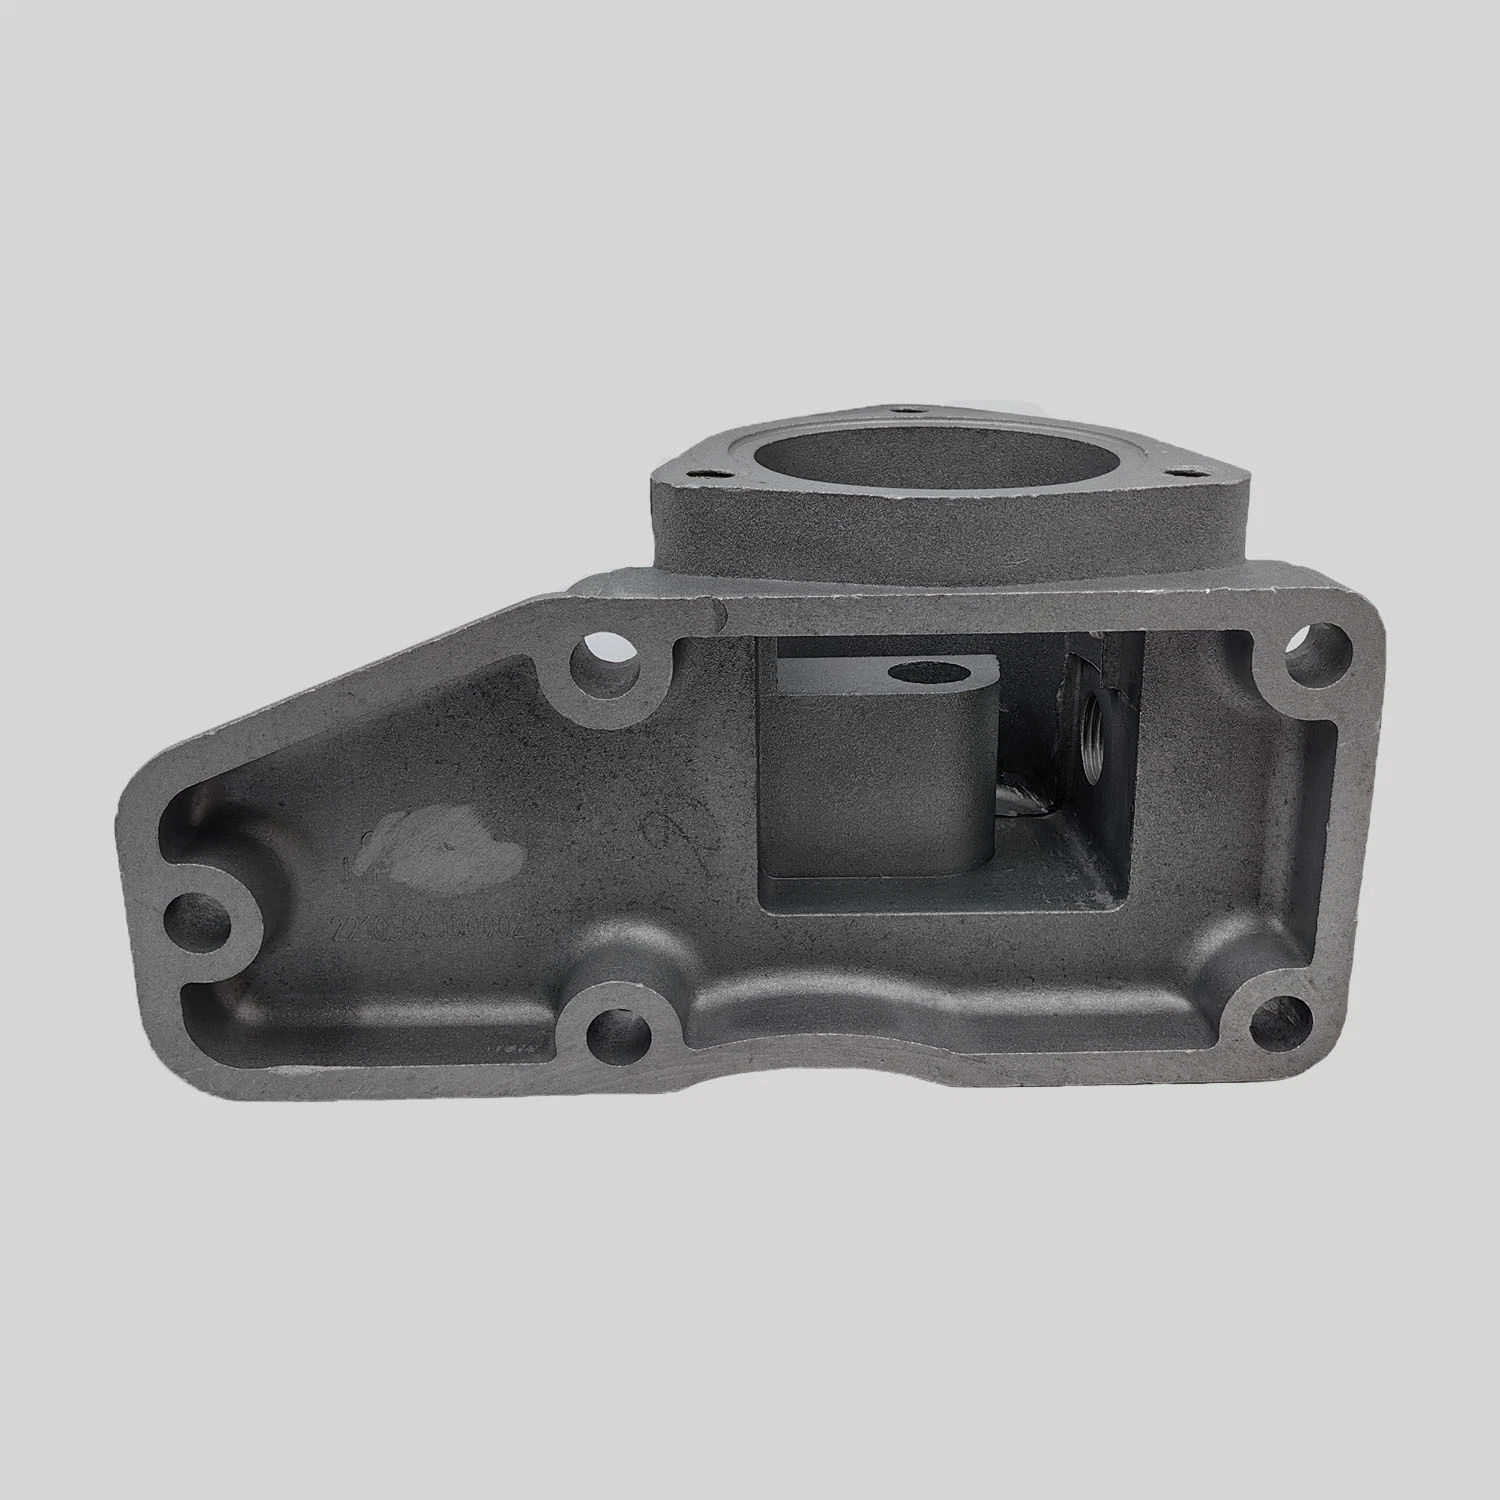 Original Factory CNC Machining Metal Iron Sand Casting for Engineering Machinery Parts with Good Quality